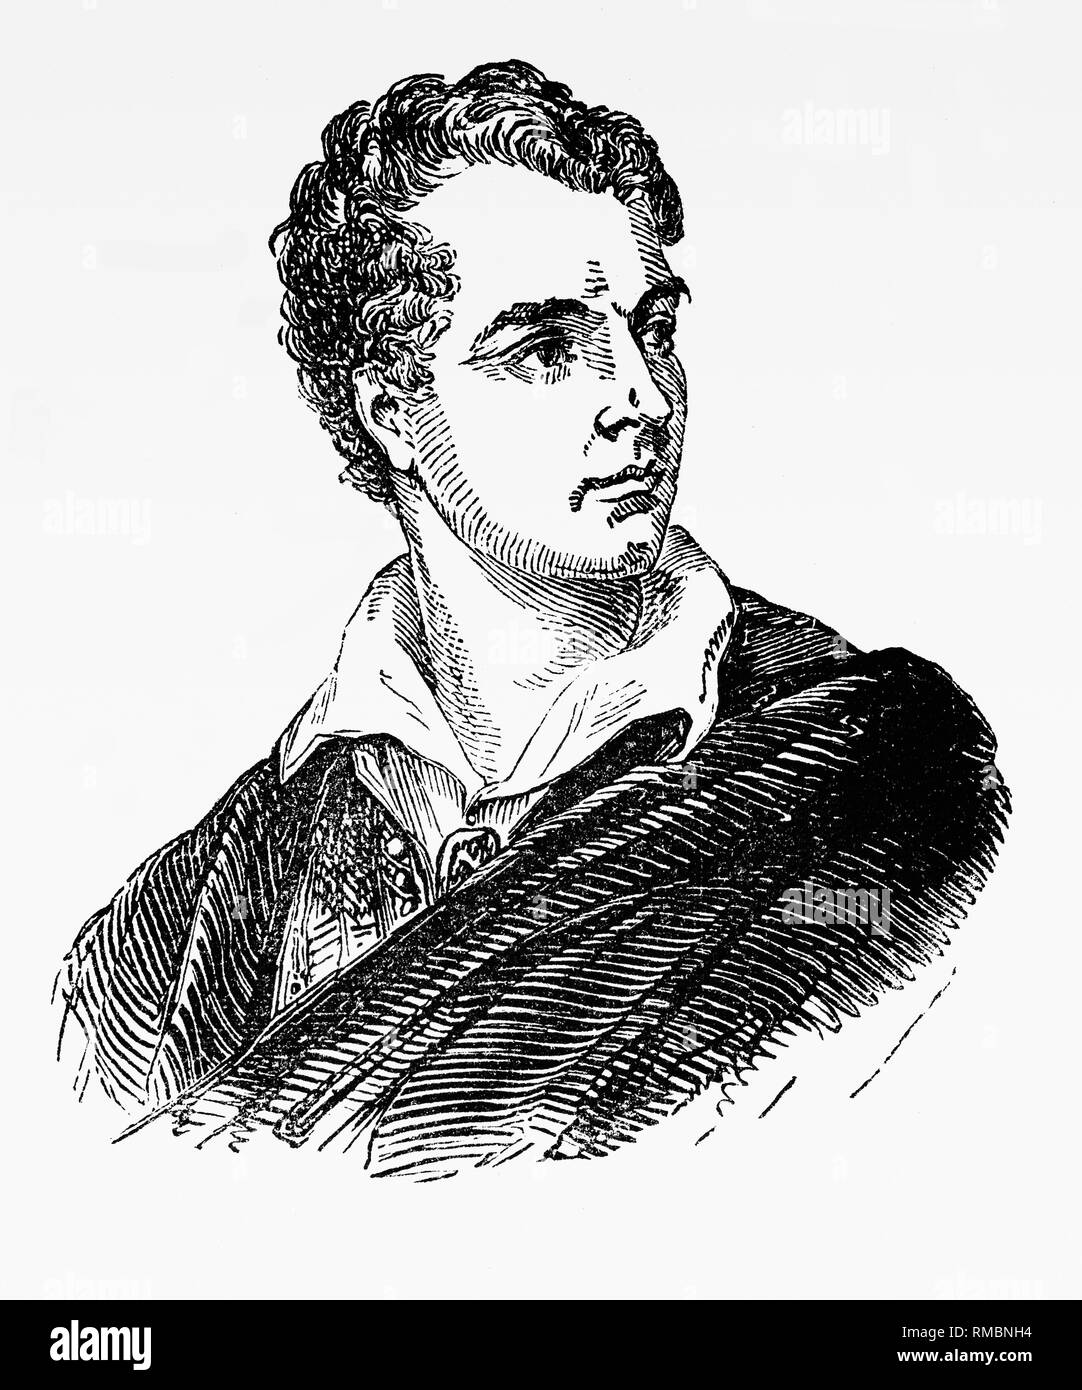 Lord Byron (1788-1824), was a British poet, peer, politician, and leading figure in the Romantic movement. Regarded as one of the greatest British poet, he travelled extensively across Europe, especially in Italy, where he lived for seven years frequently visiting his friend and fellow poet Percy Bysshe Shelley. He died in 1824 at the age of 36 from a fever contracted in Missolonghi during Greek War of Independence. Byron is considered to be the first modern-style celebrity, the personification of the Byronic hero that his wife Annabella called 'Byromania'. Stock Photo